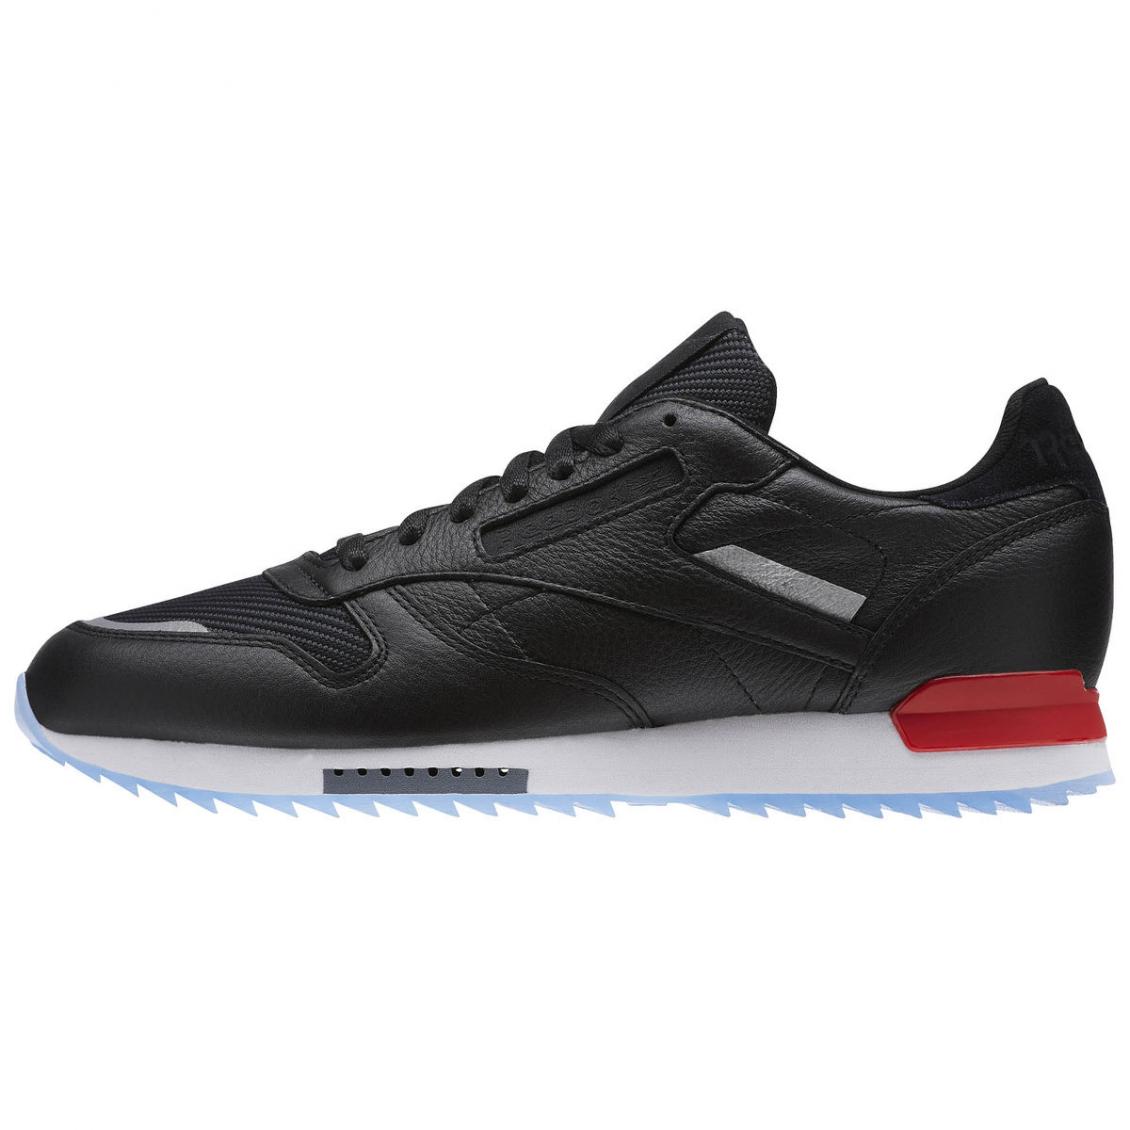 Black – Reebok Classic Leather Ripple Low BP Mens Black / White / Primal Red / Asteroid Dust / Ice